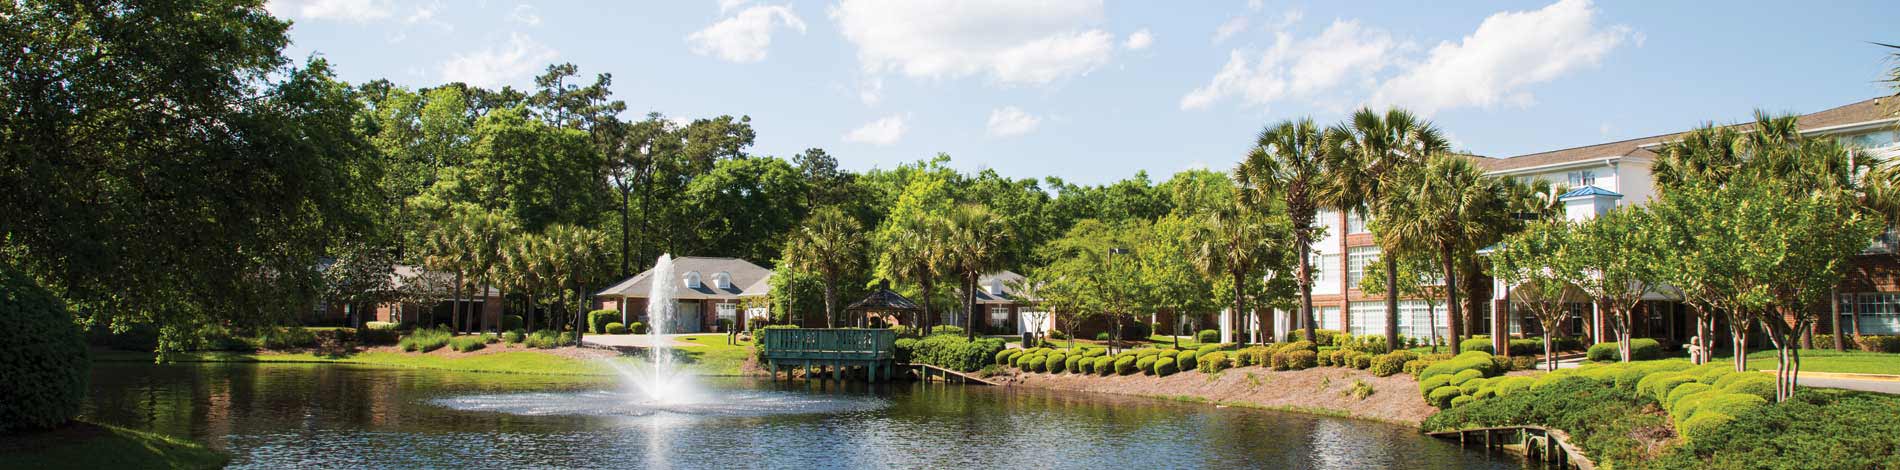 About Lakes at Litchfield Retirement Community